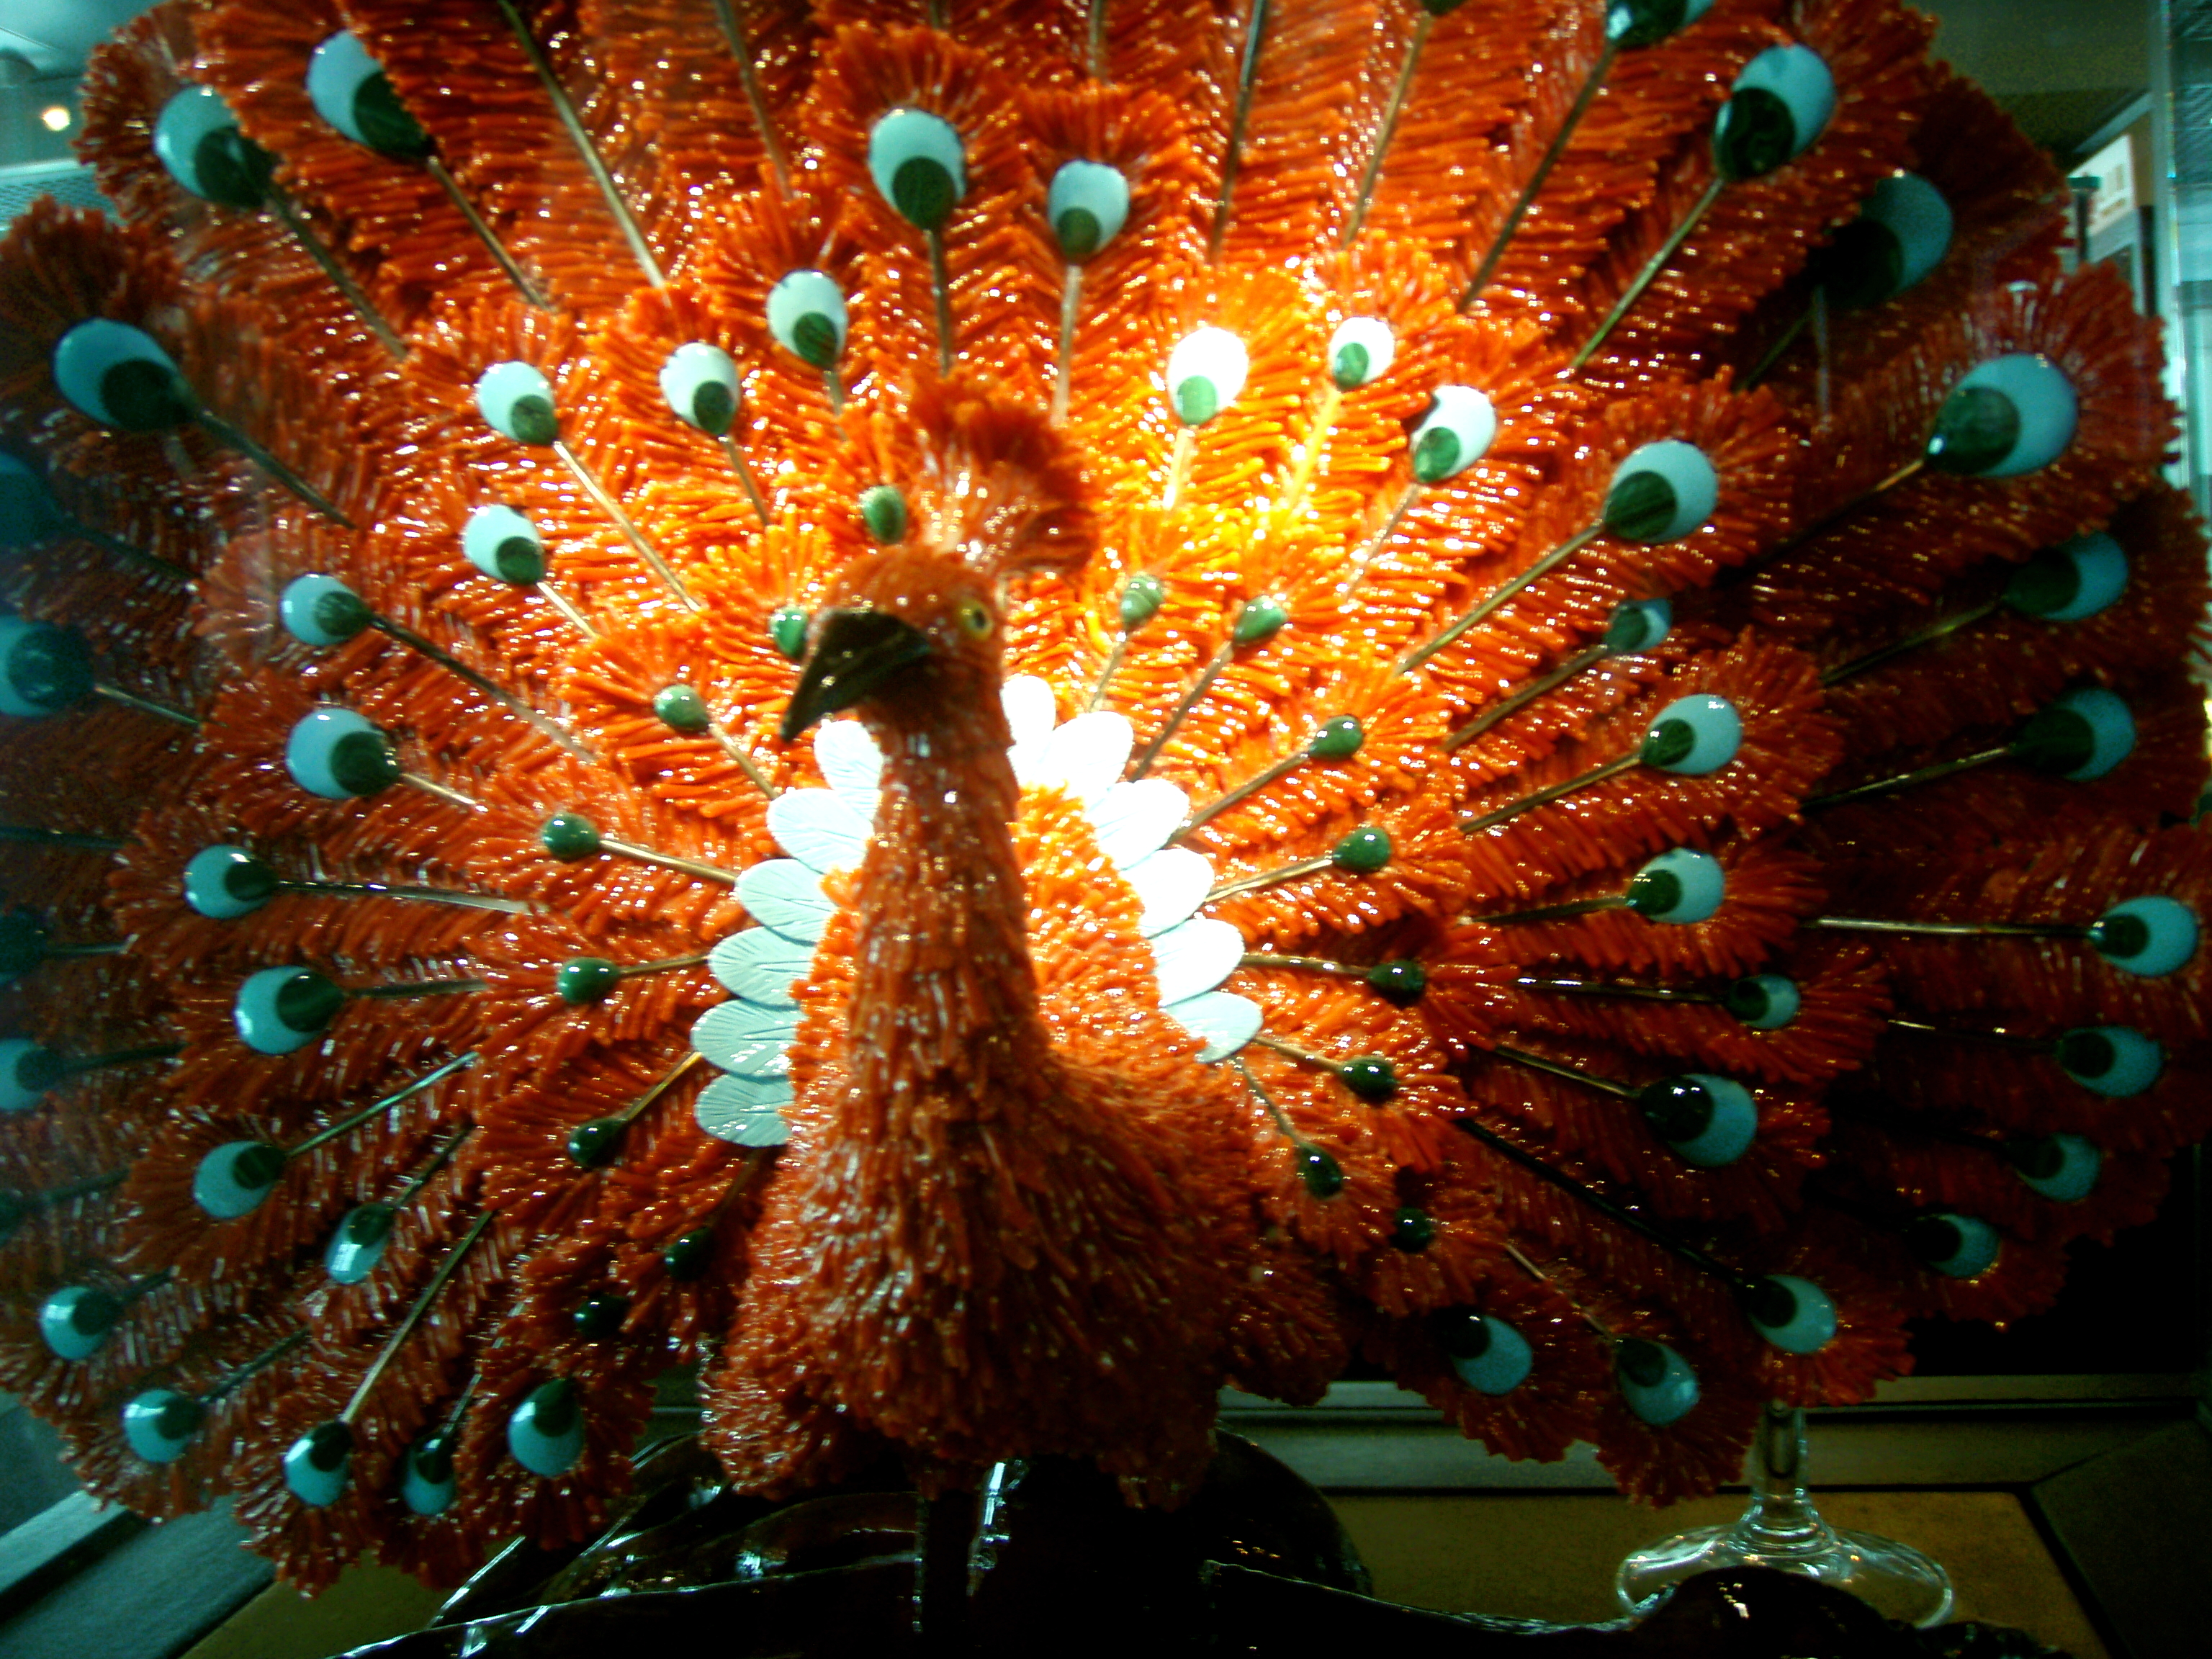 Peacock Coral Statue behind glass, Art, Bird, Colorful, Feathers, HQ Photo